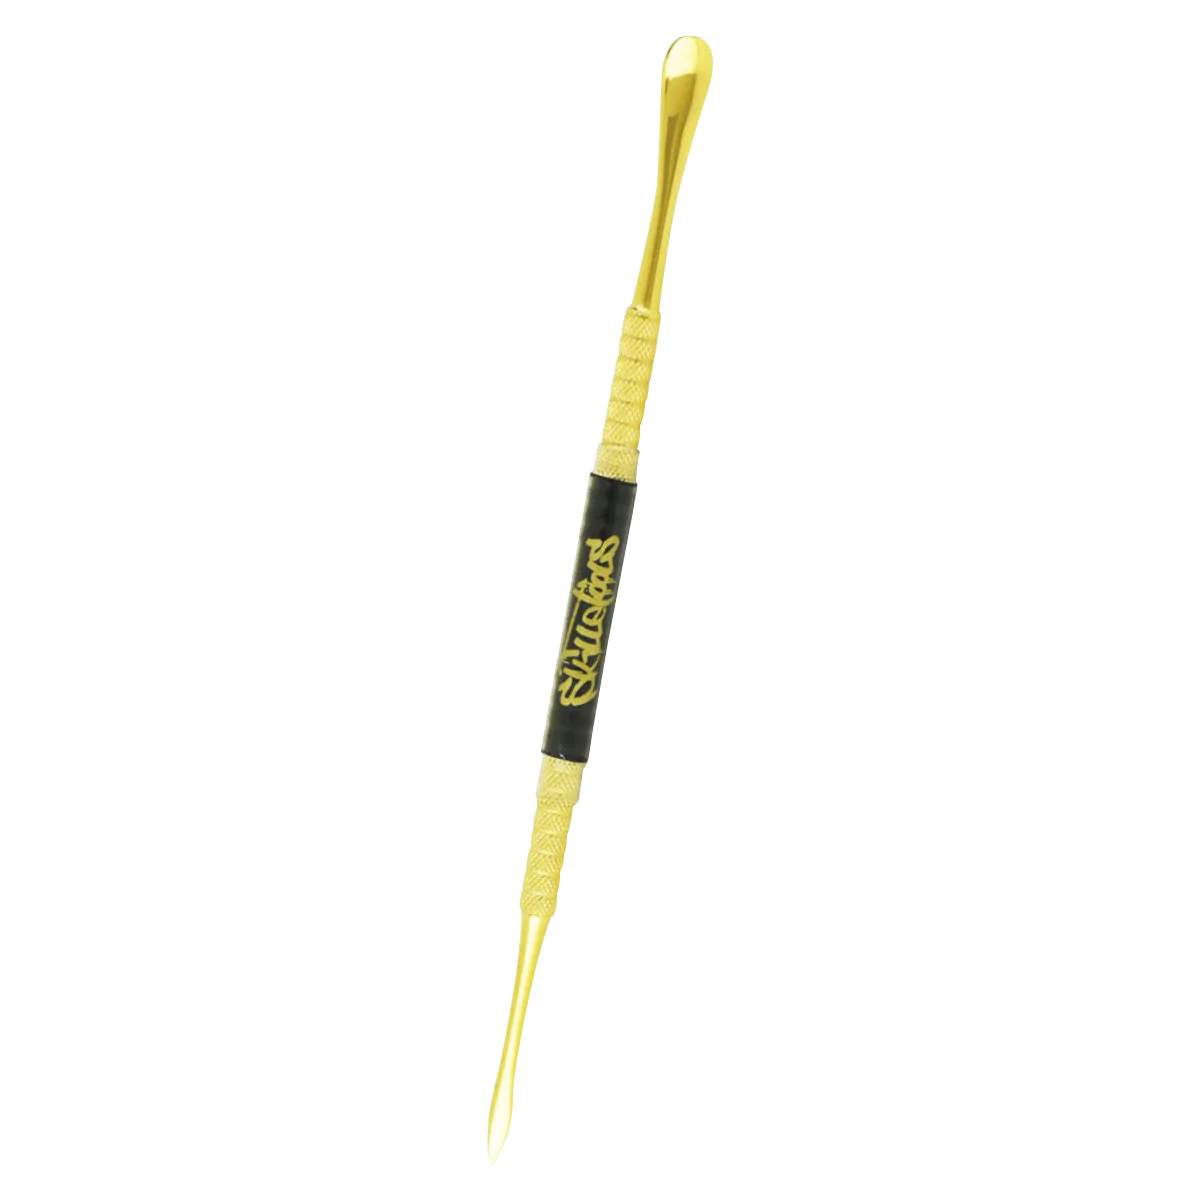 Skilletools Gold Series Dab Tool, 6" Metal, Compact Design for Dab Rigs, Angled View